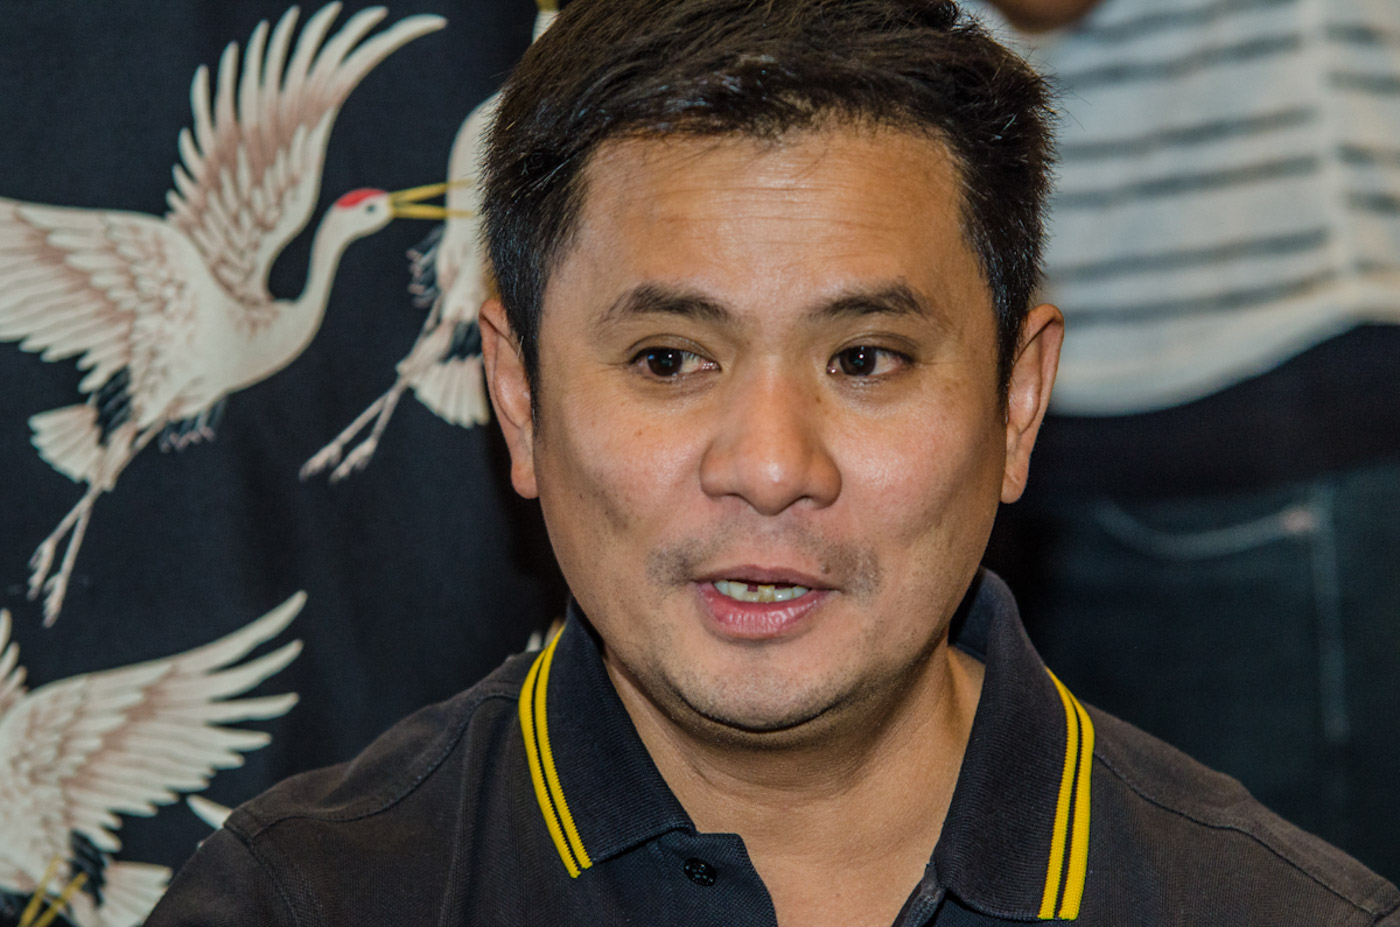 OGIE ALCASID. The singer says he tested negative for coronavirus after two earlier rapid tests showed he was positive. File photo by Rob Reyes/Rappler 